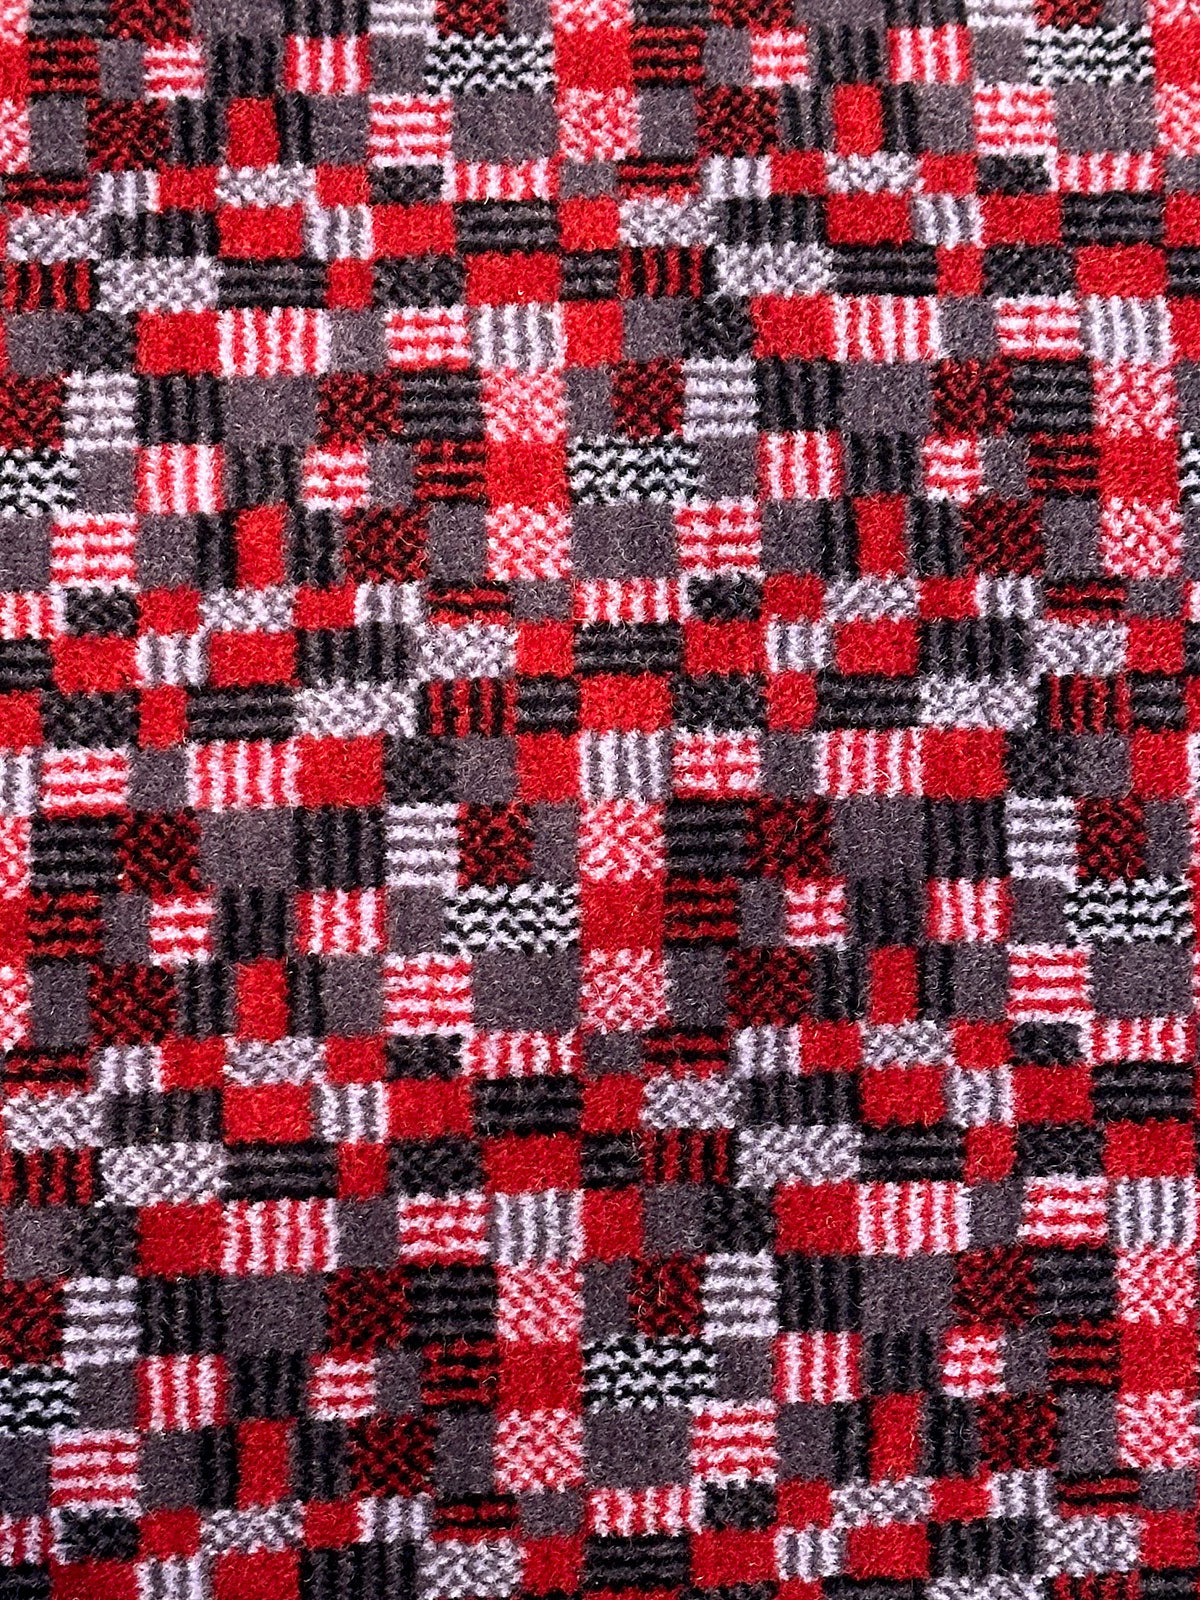 Moquette cushion detail - Grey and red squares